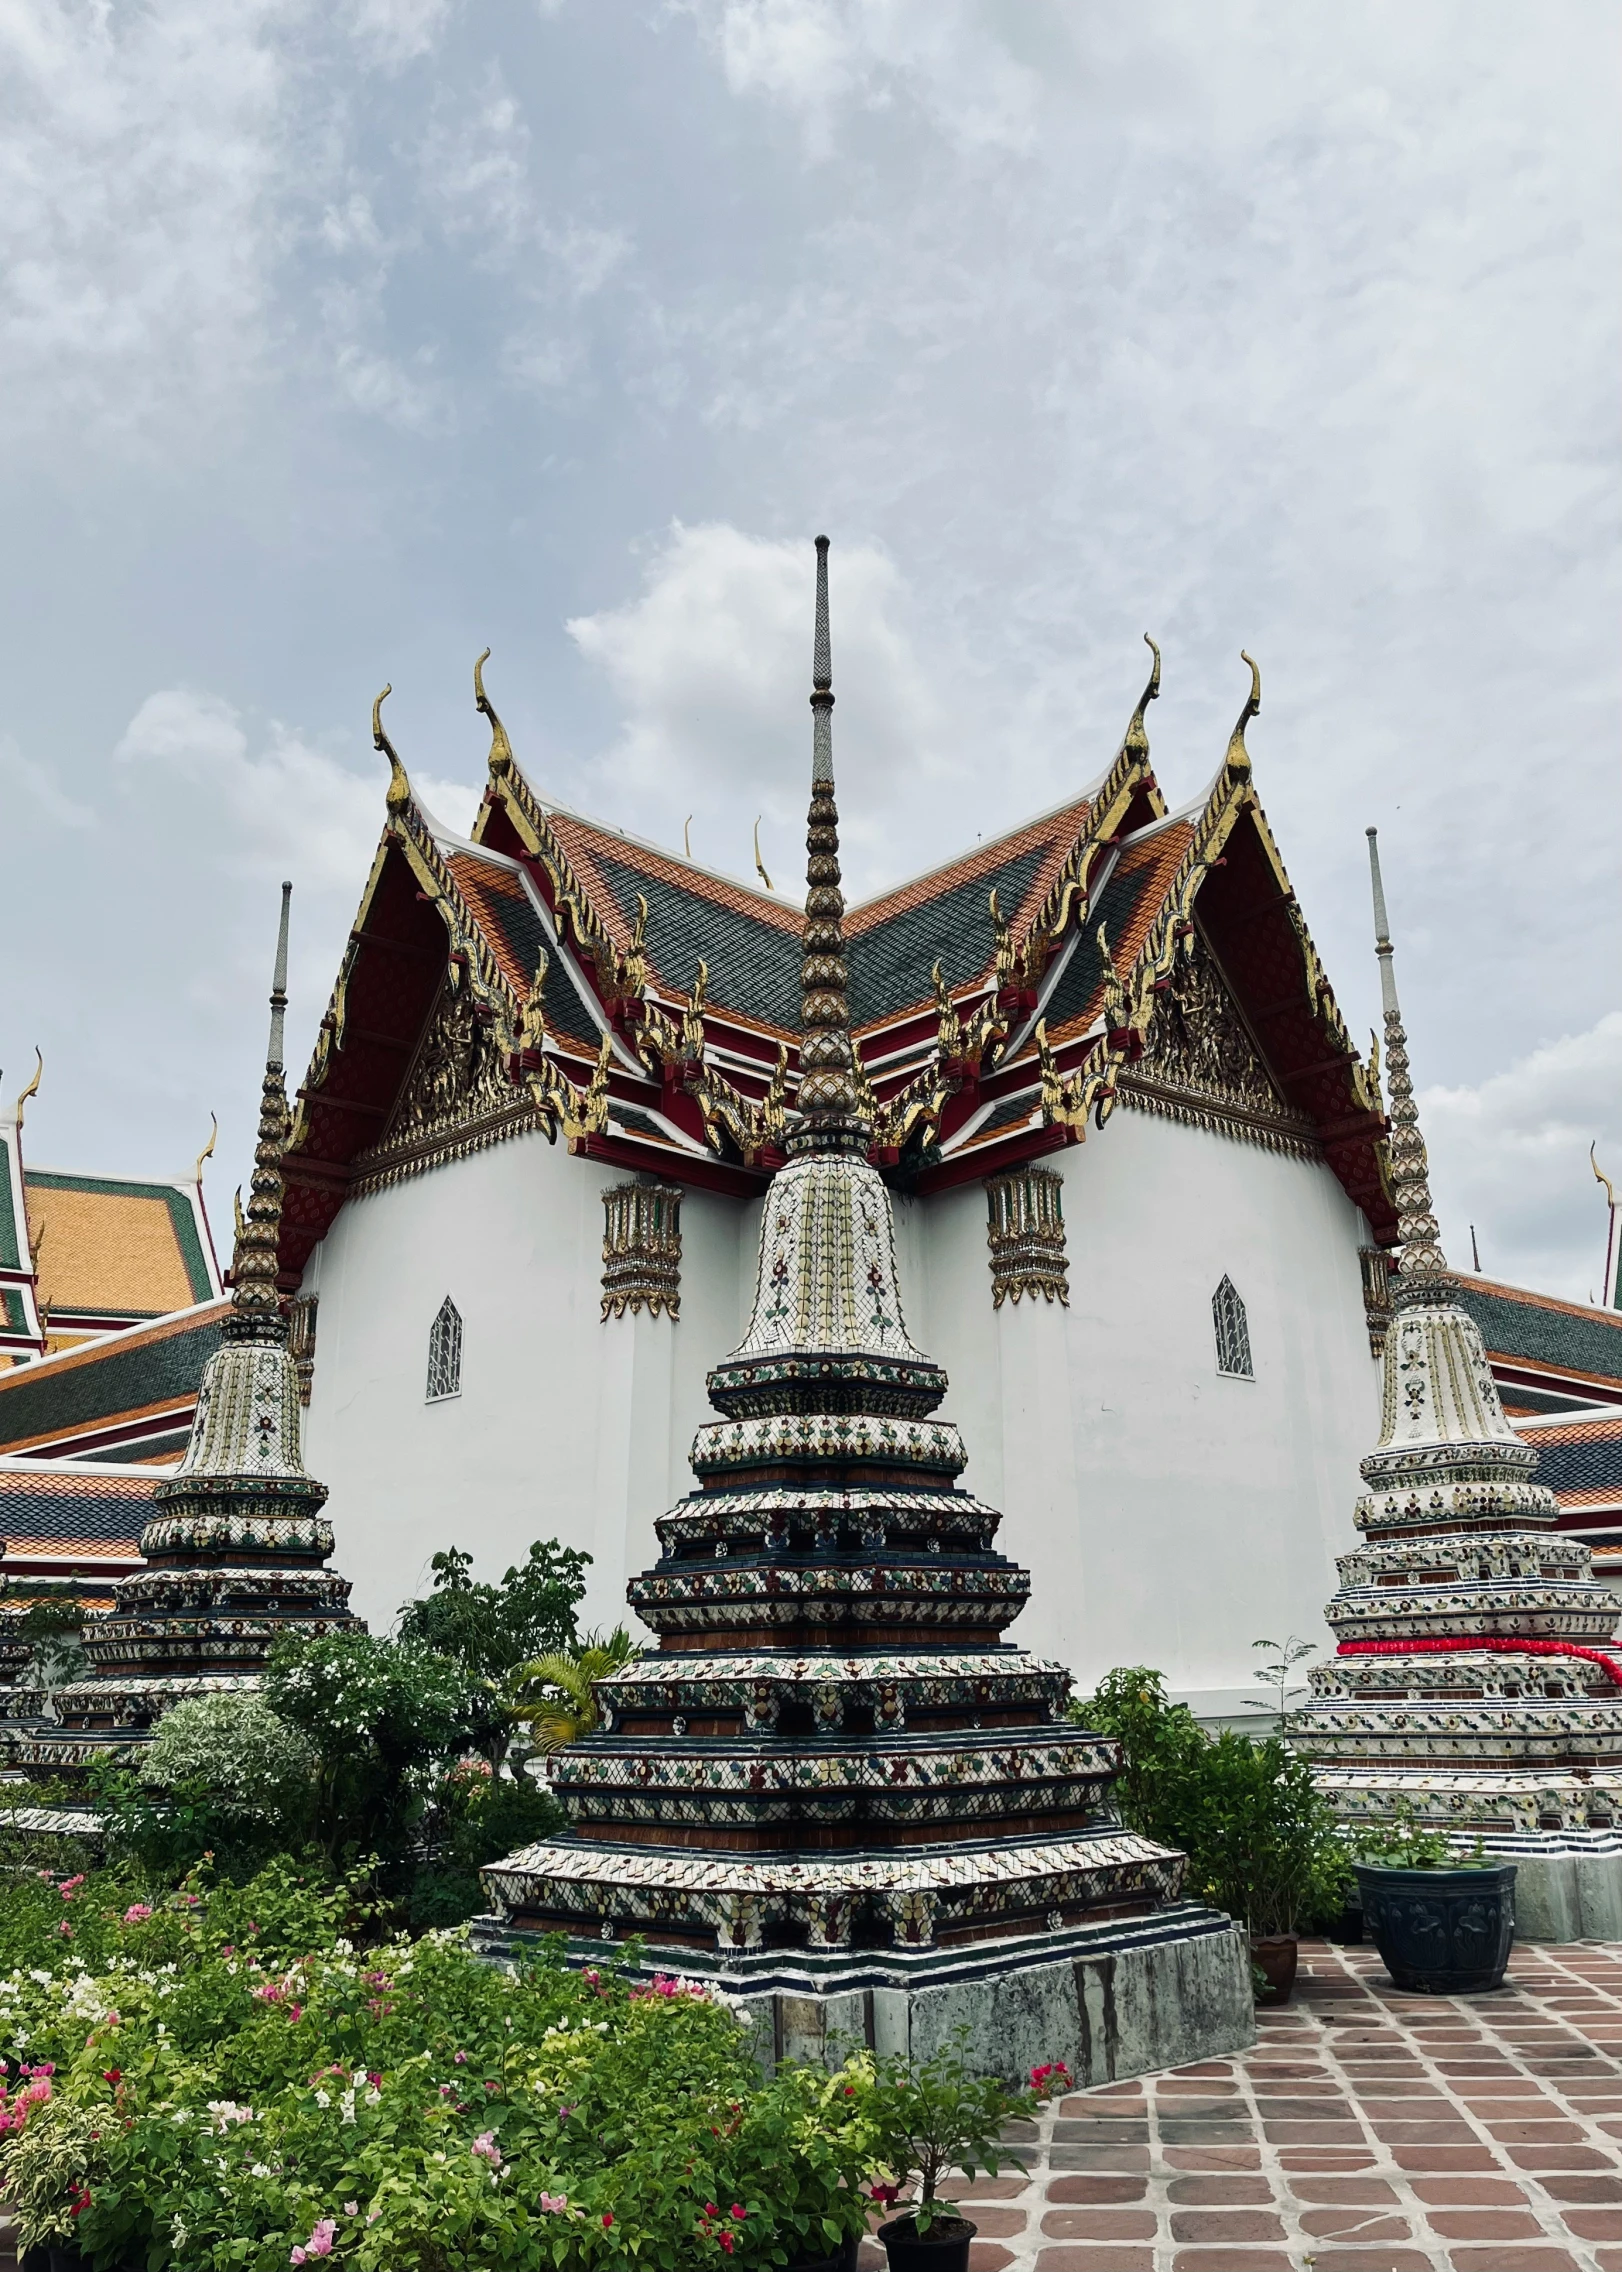 many pagodas are on the side of a white building